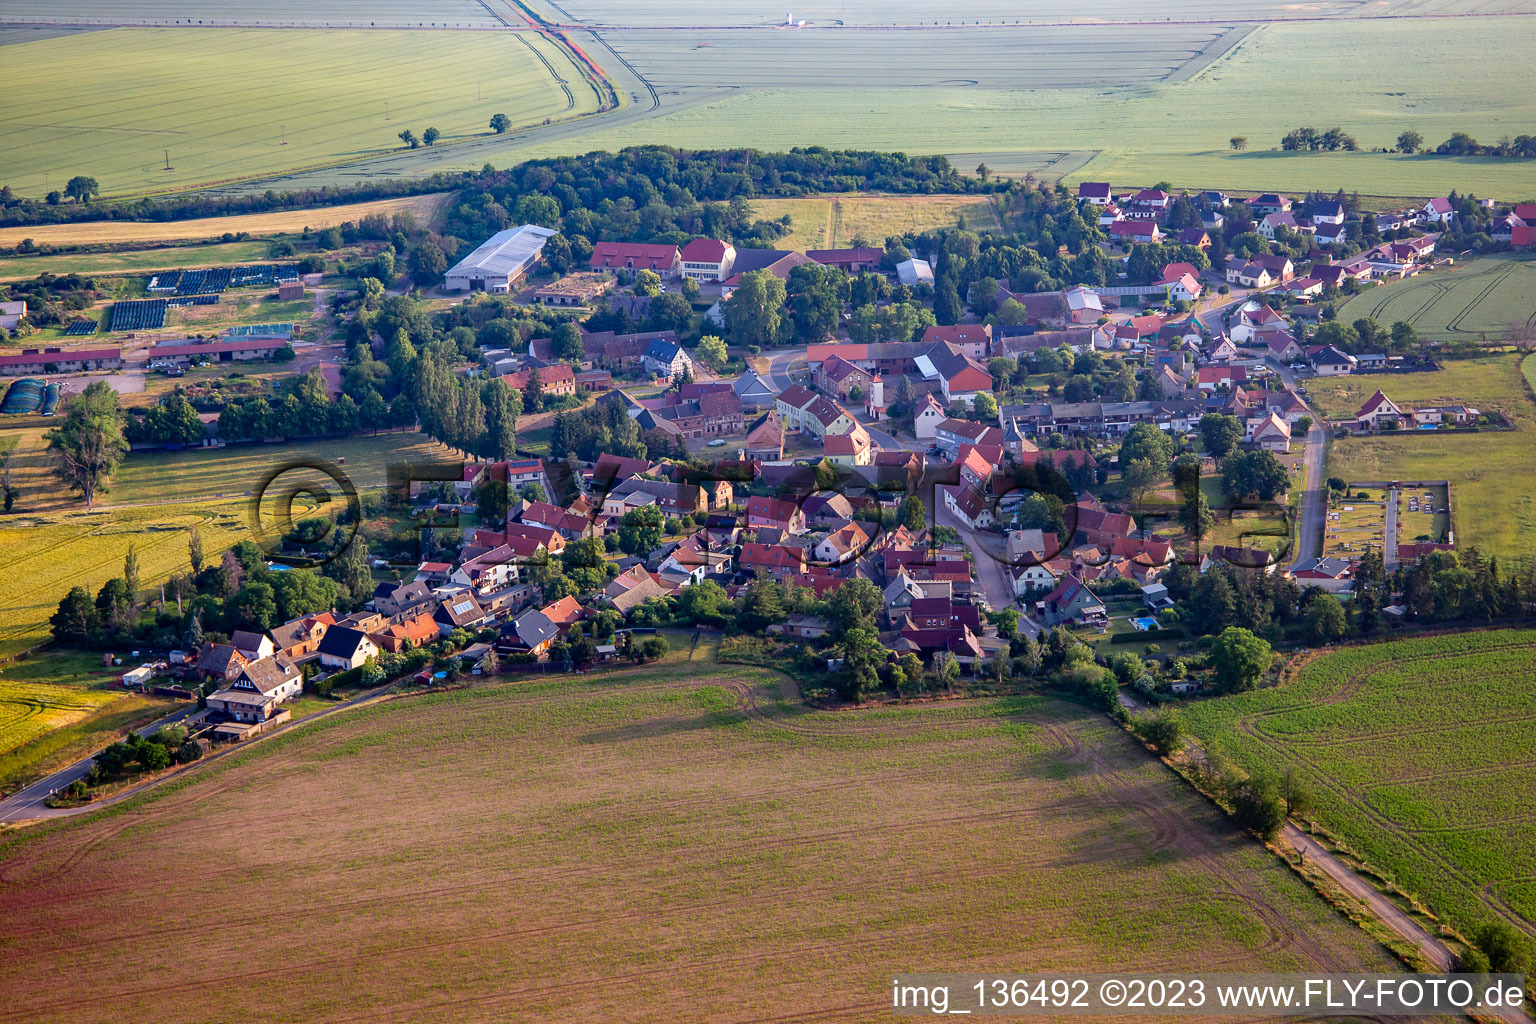 From the south in the district Endorf in Falkenstein in the state Saxony-Anhalt, Germany